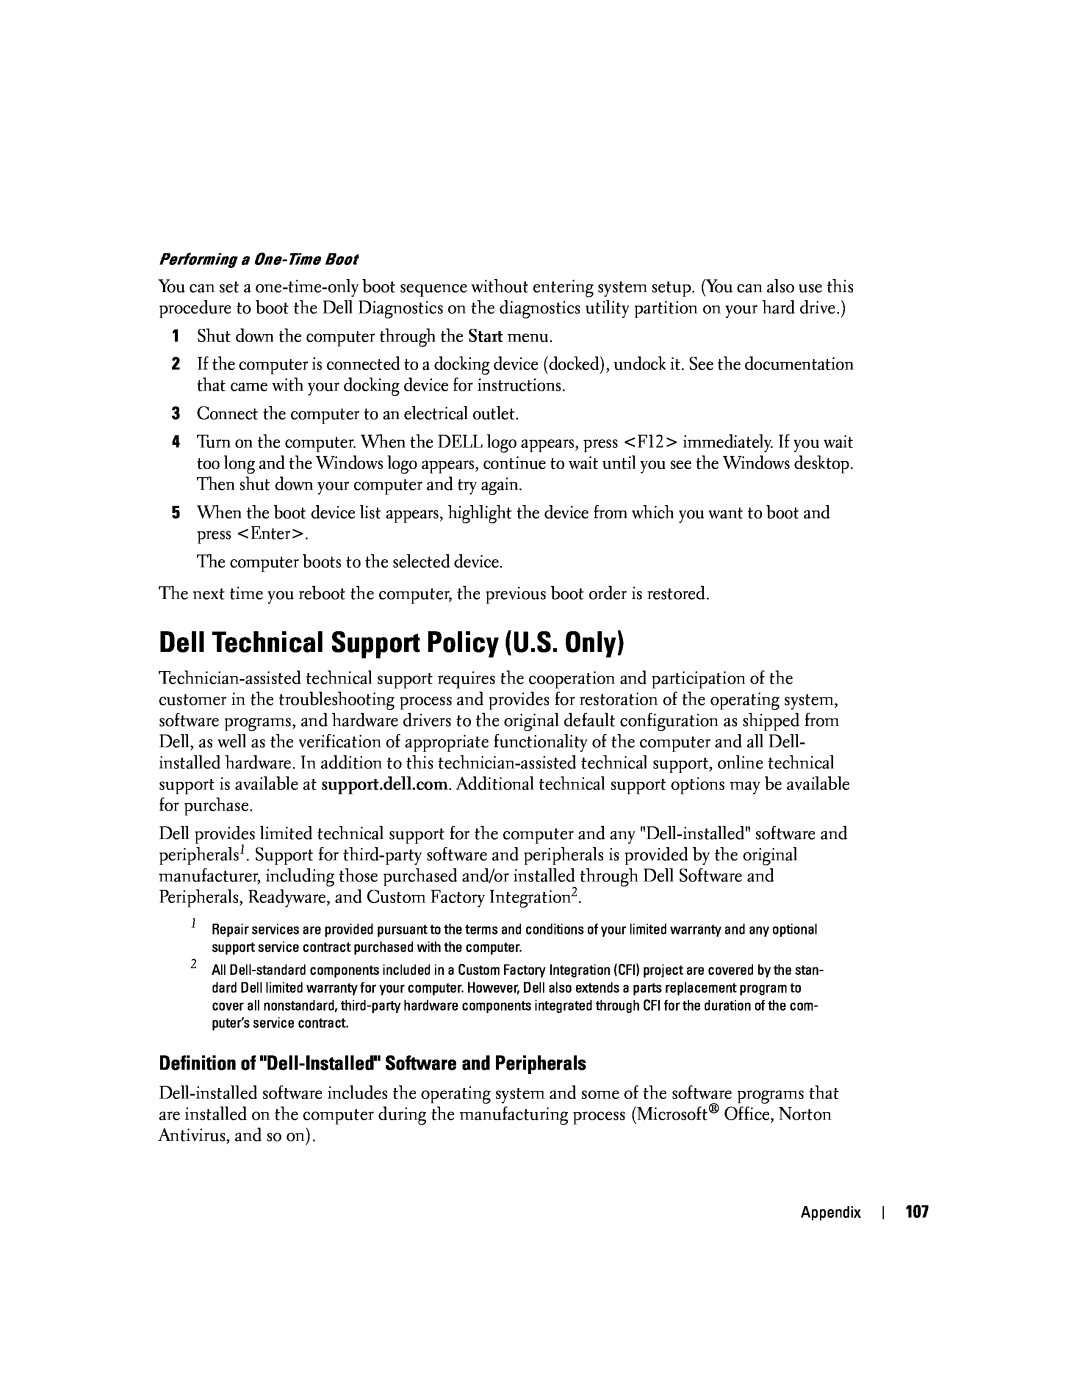 Dell 9300 owner manual Dell Technical Support Policy U.S. Only, Definition of Dell-Installed Software and Peripherals 